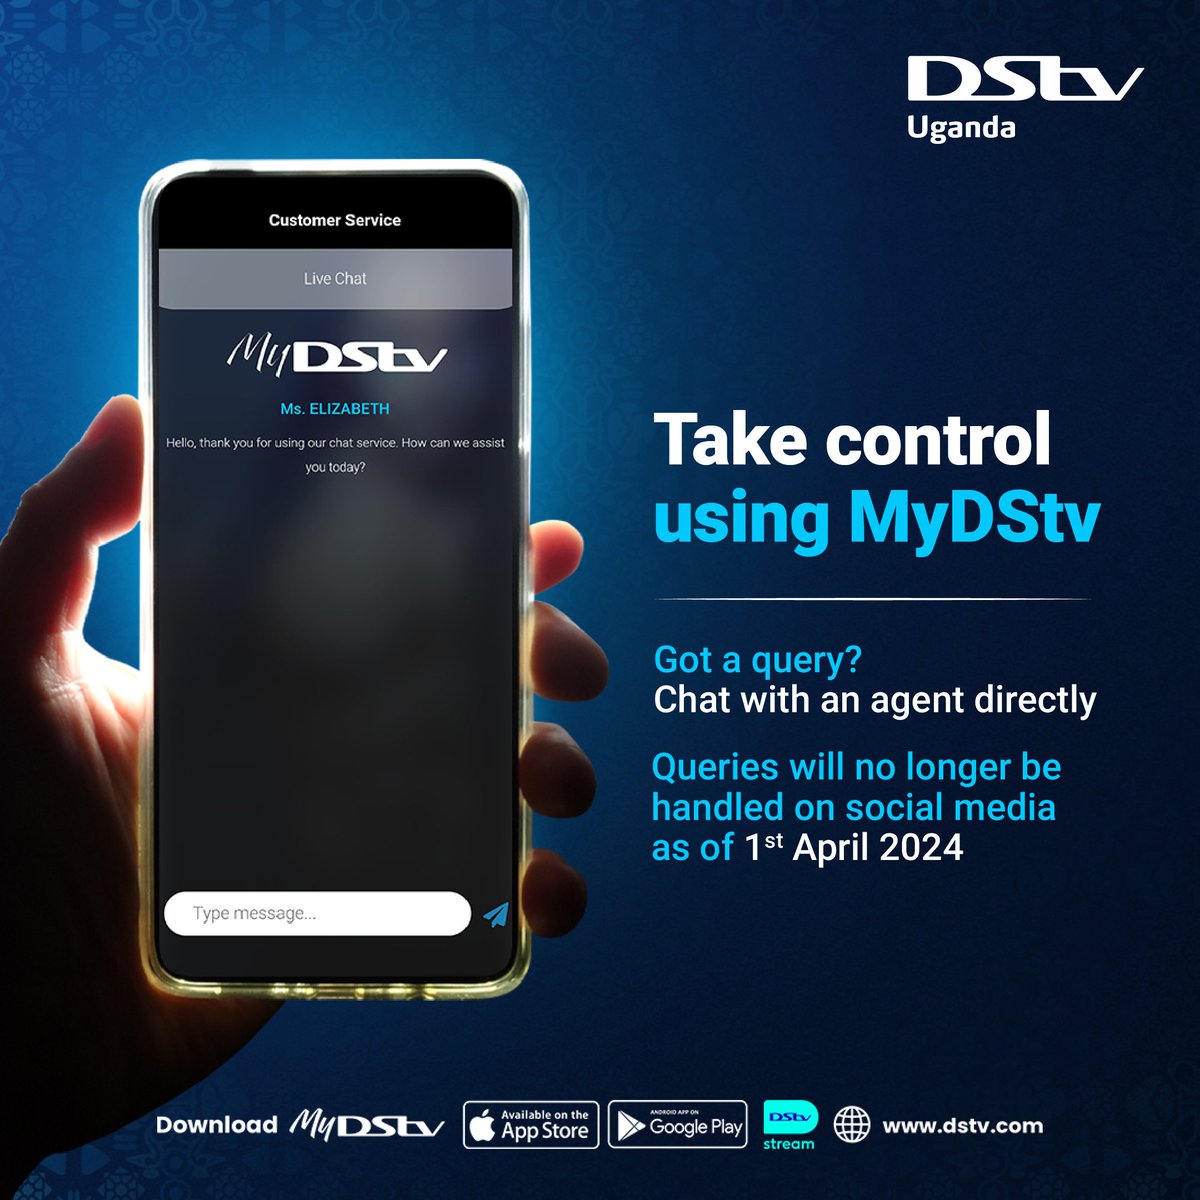 Don't miss out on personalized service and exclusive offers! Update your details on the #MyDStv App now: apps.apple.com/ng/app/mydstv-…, and enjoy the convenience. #YourHomeOfEntertainment